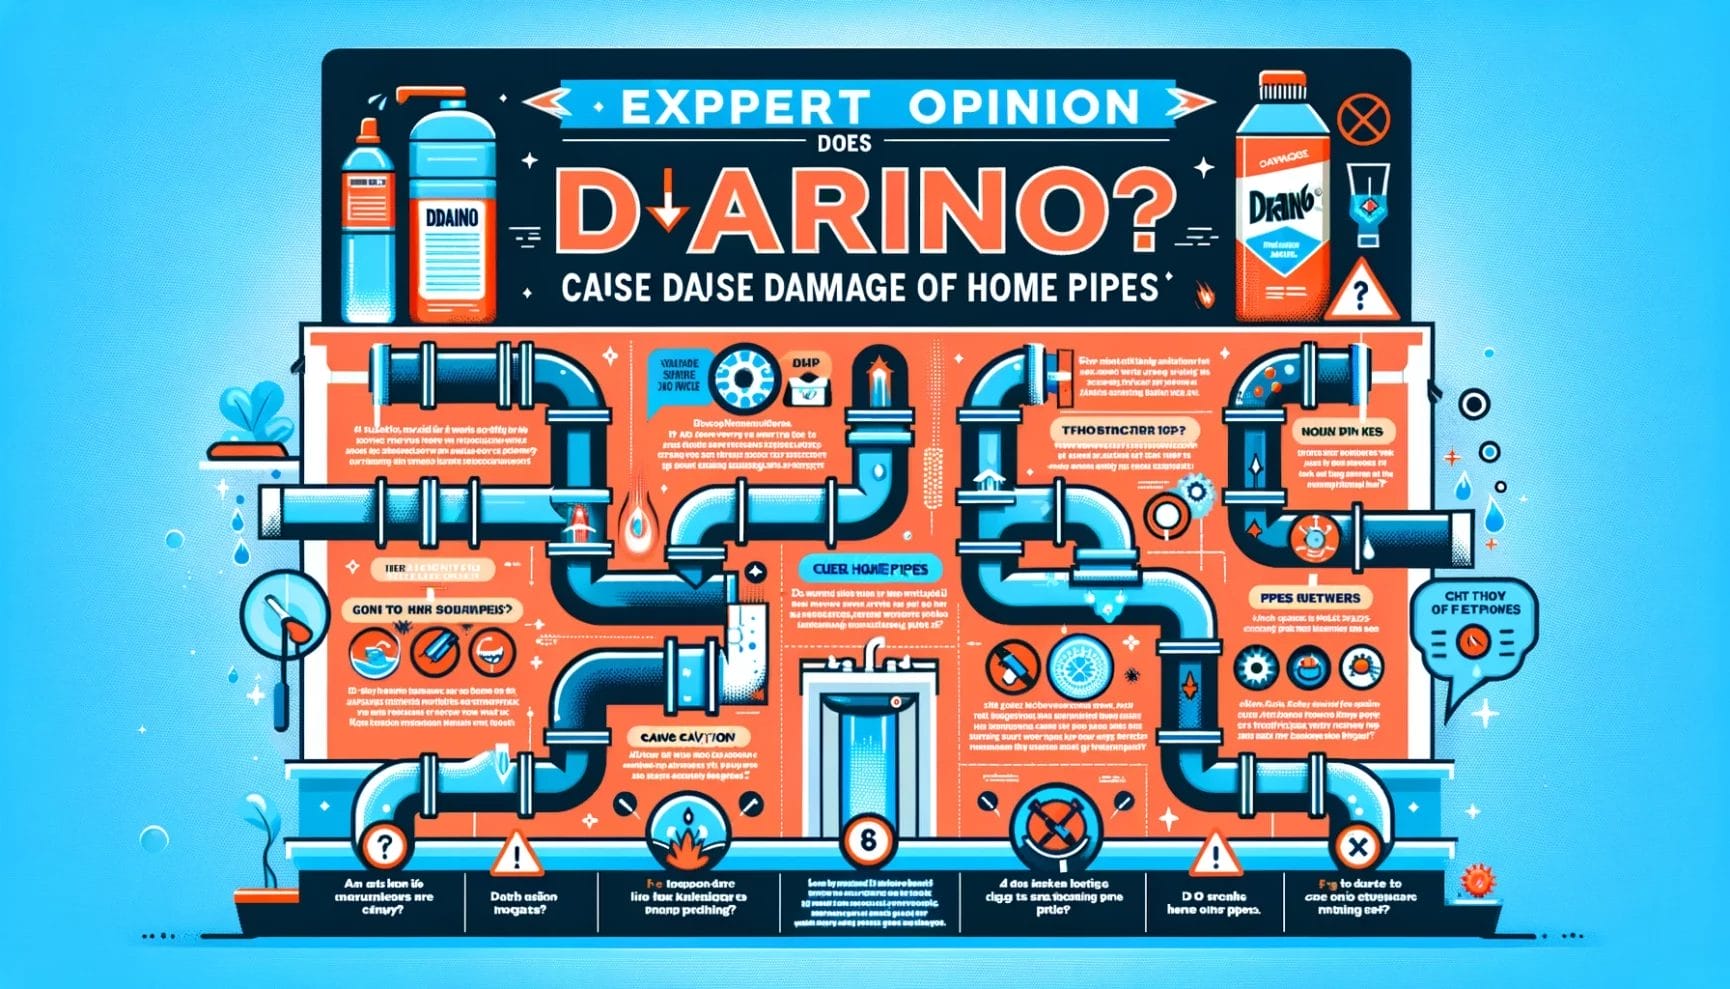 Illustrative infographic explaining the effects of a product called "d'arino" on home pipes with various icons and text sections.